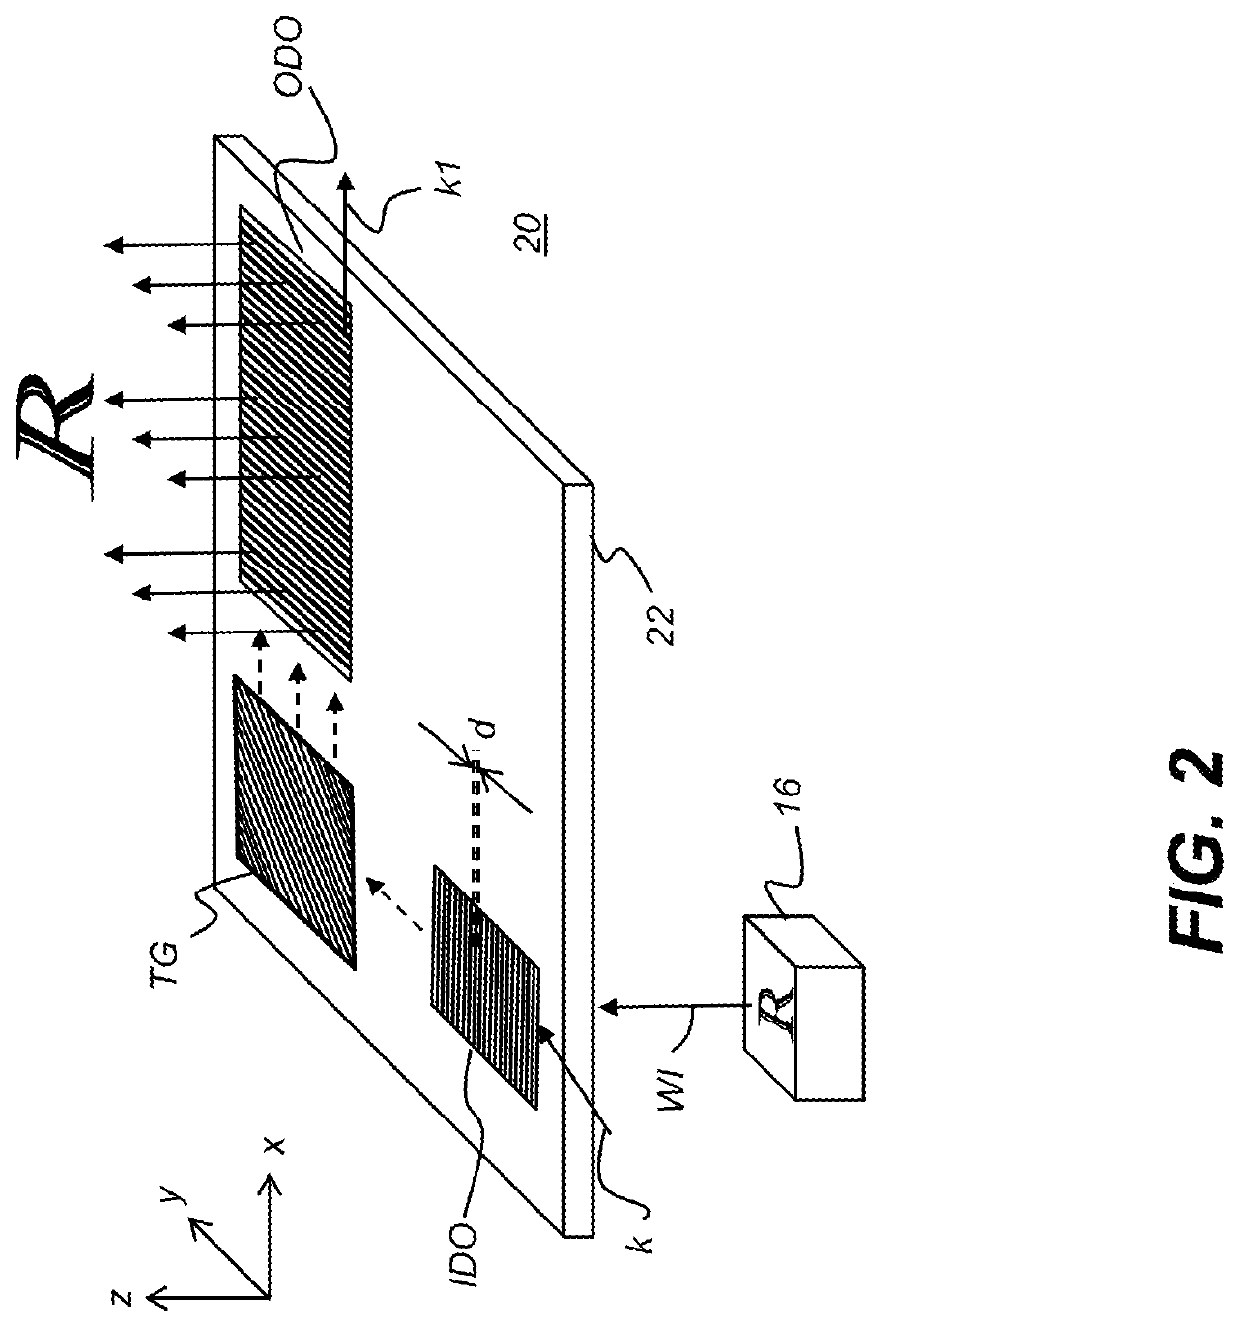 Head-mounted display with pivoting imaging light guide